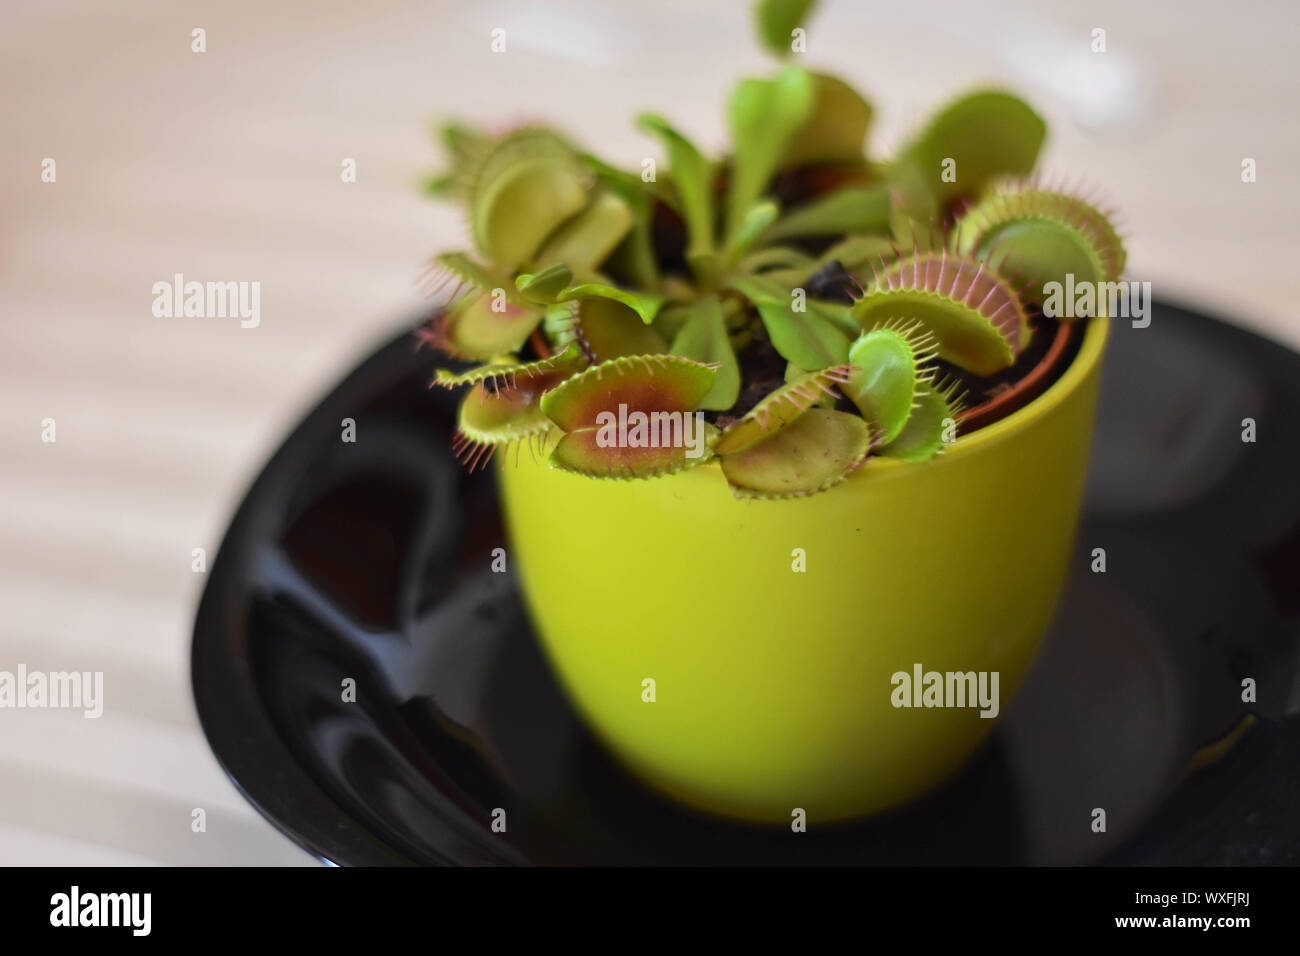 Several Venus flytraps in pot. Close up on carnivorous plant waiting for its prey on table Stock Photo